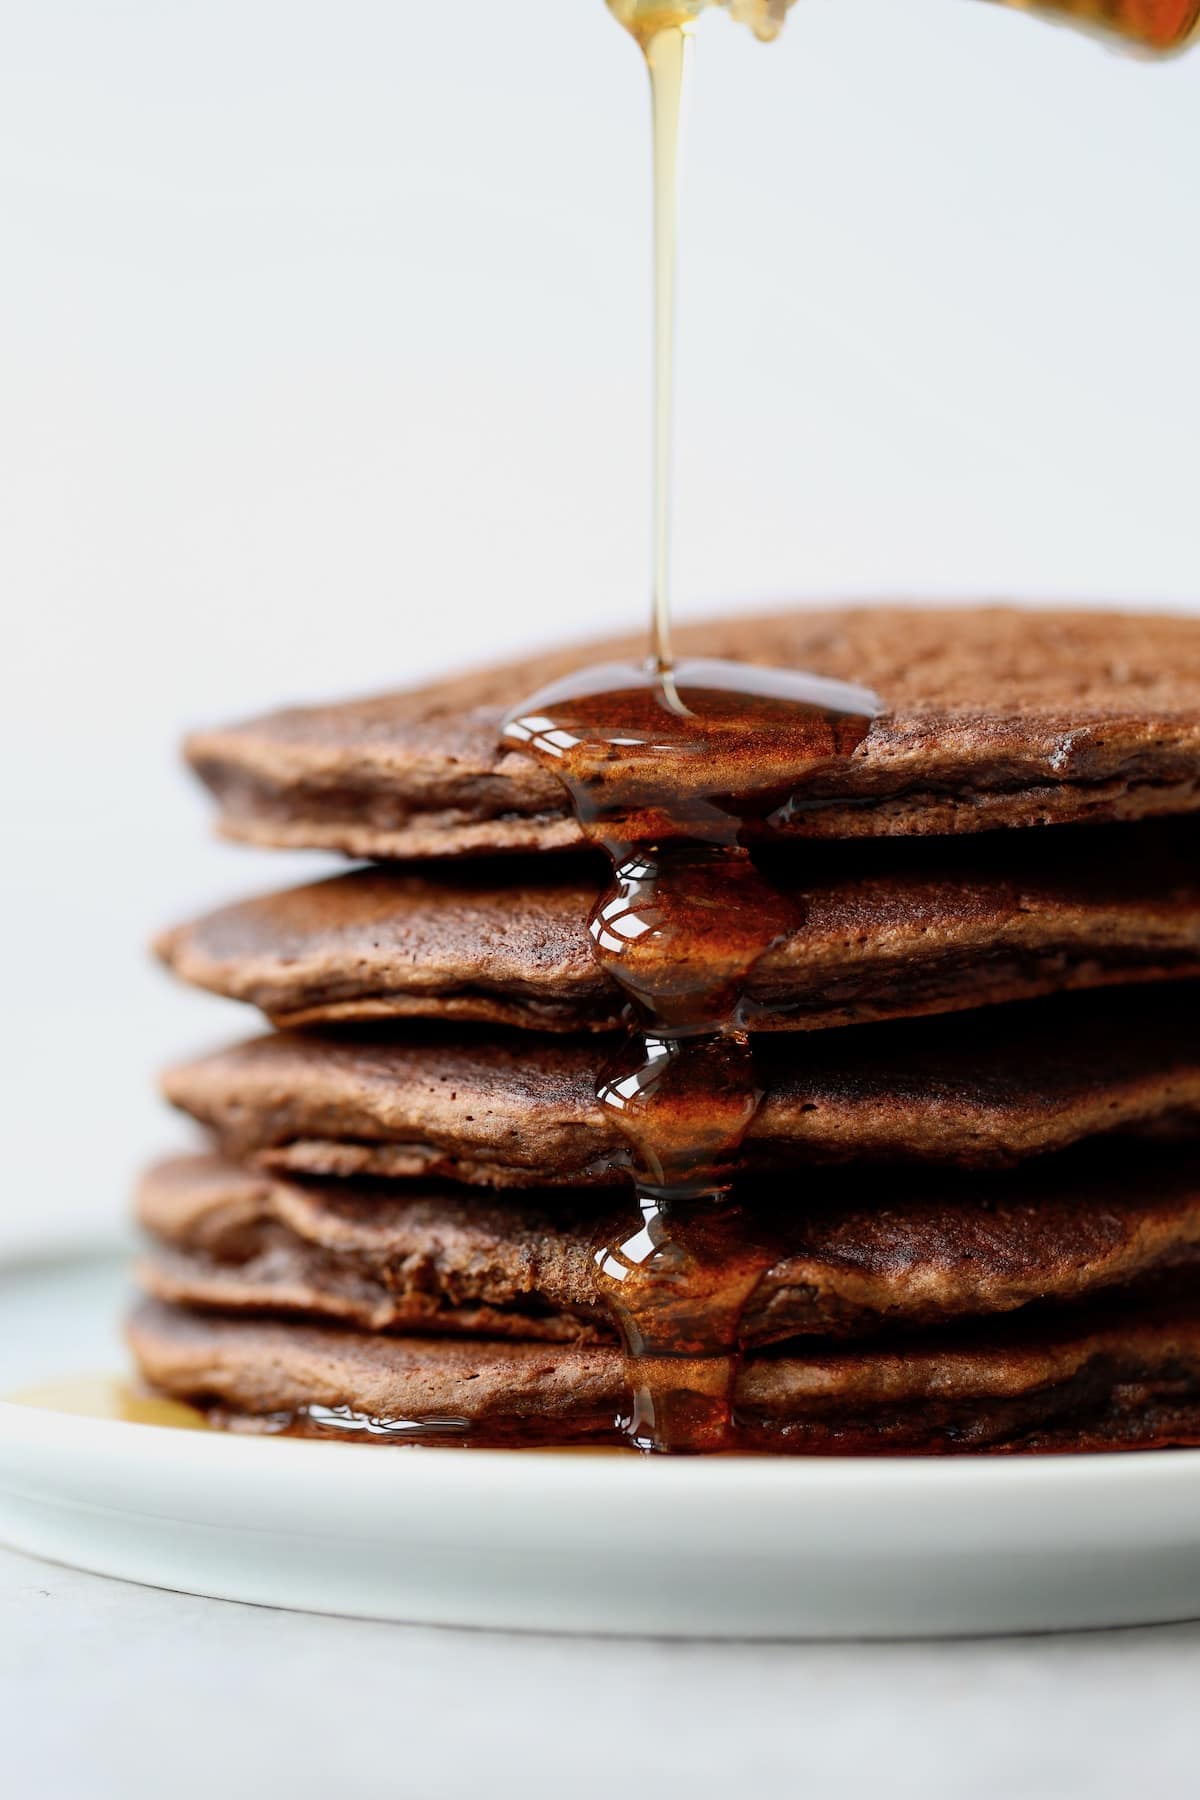 maple syrup being poured over a stack of chocolate pancakes